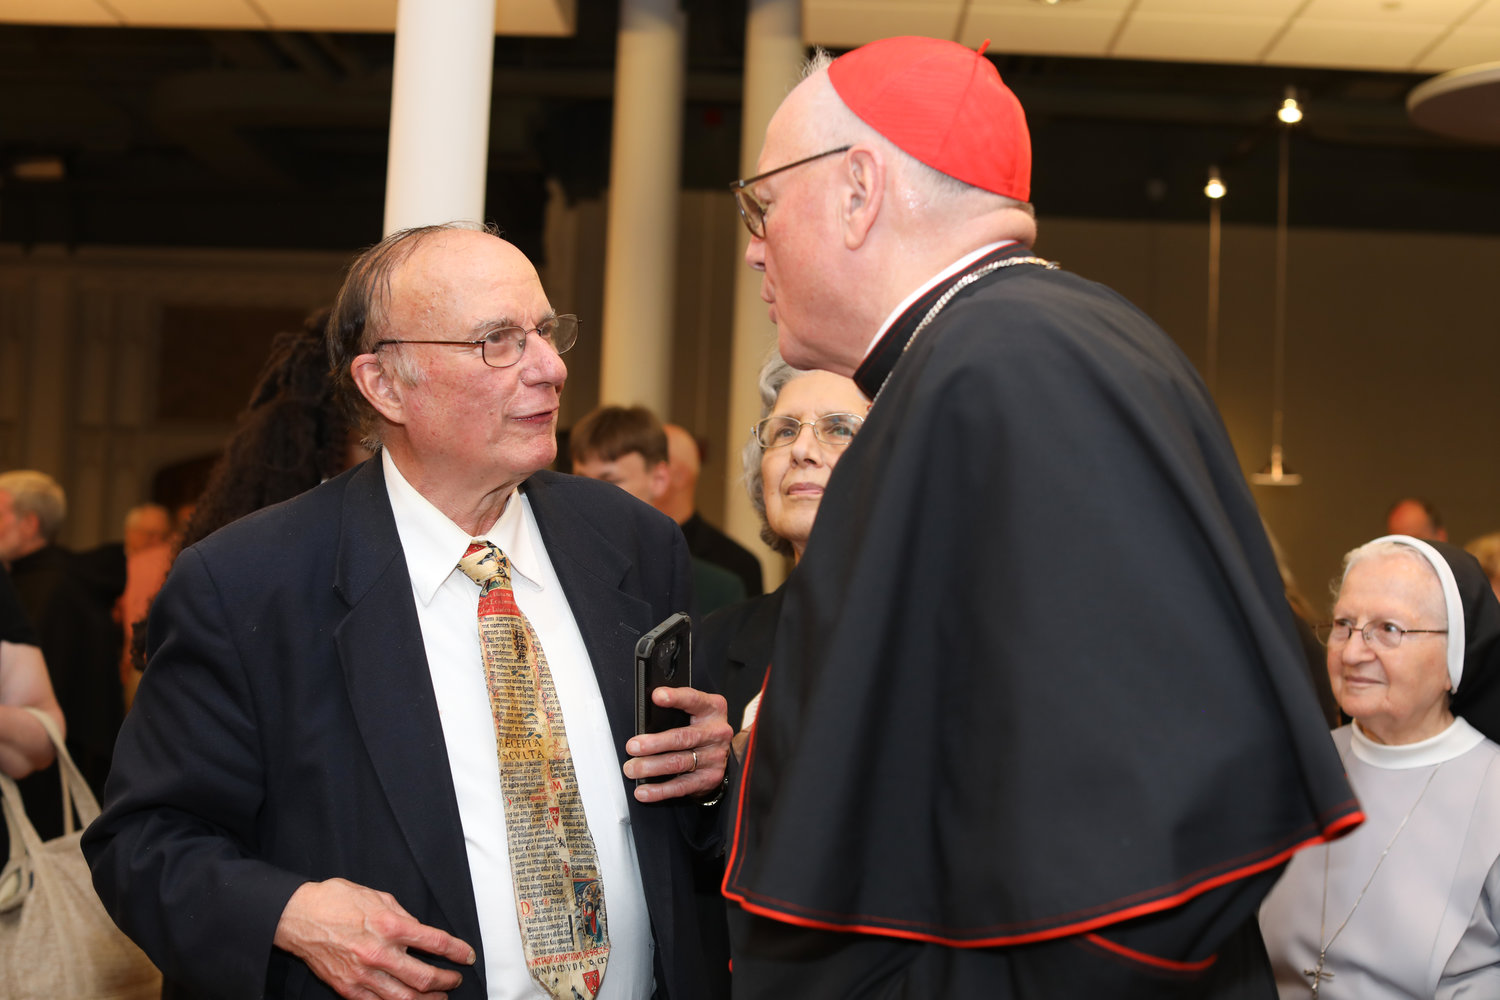 Richard Dujardin, longtime religion reporter for The Providence Journal, accompanied by his wife Rose-Marie, speaks with Cardinal Timothy M. Dolan, Archbishop of New York, during the Cardinal’s special presentation at the Cathedral of Saints Peter and Paul as part of the Diocese of Providence’s 150th anniversary celebration on Sunday, May 15. Dujardin, 77, died in a fall on Aug. 15 in Milwaukee.